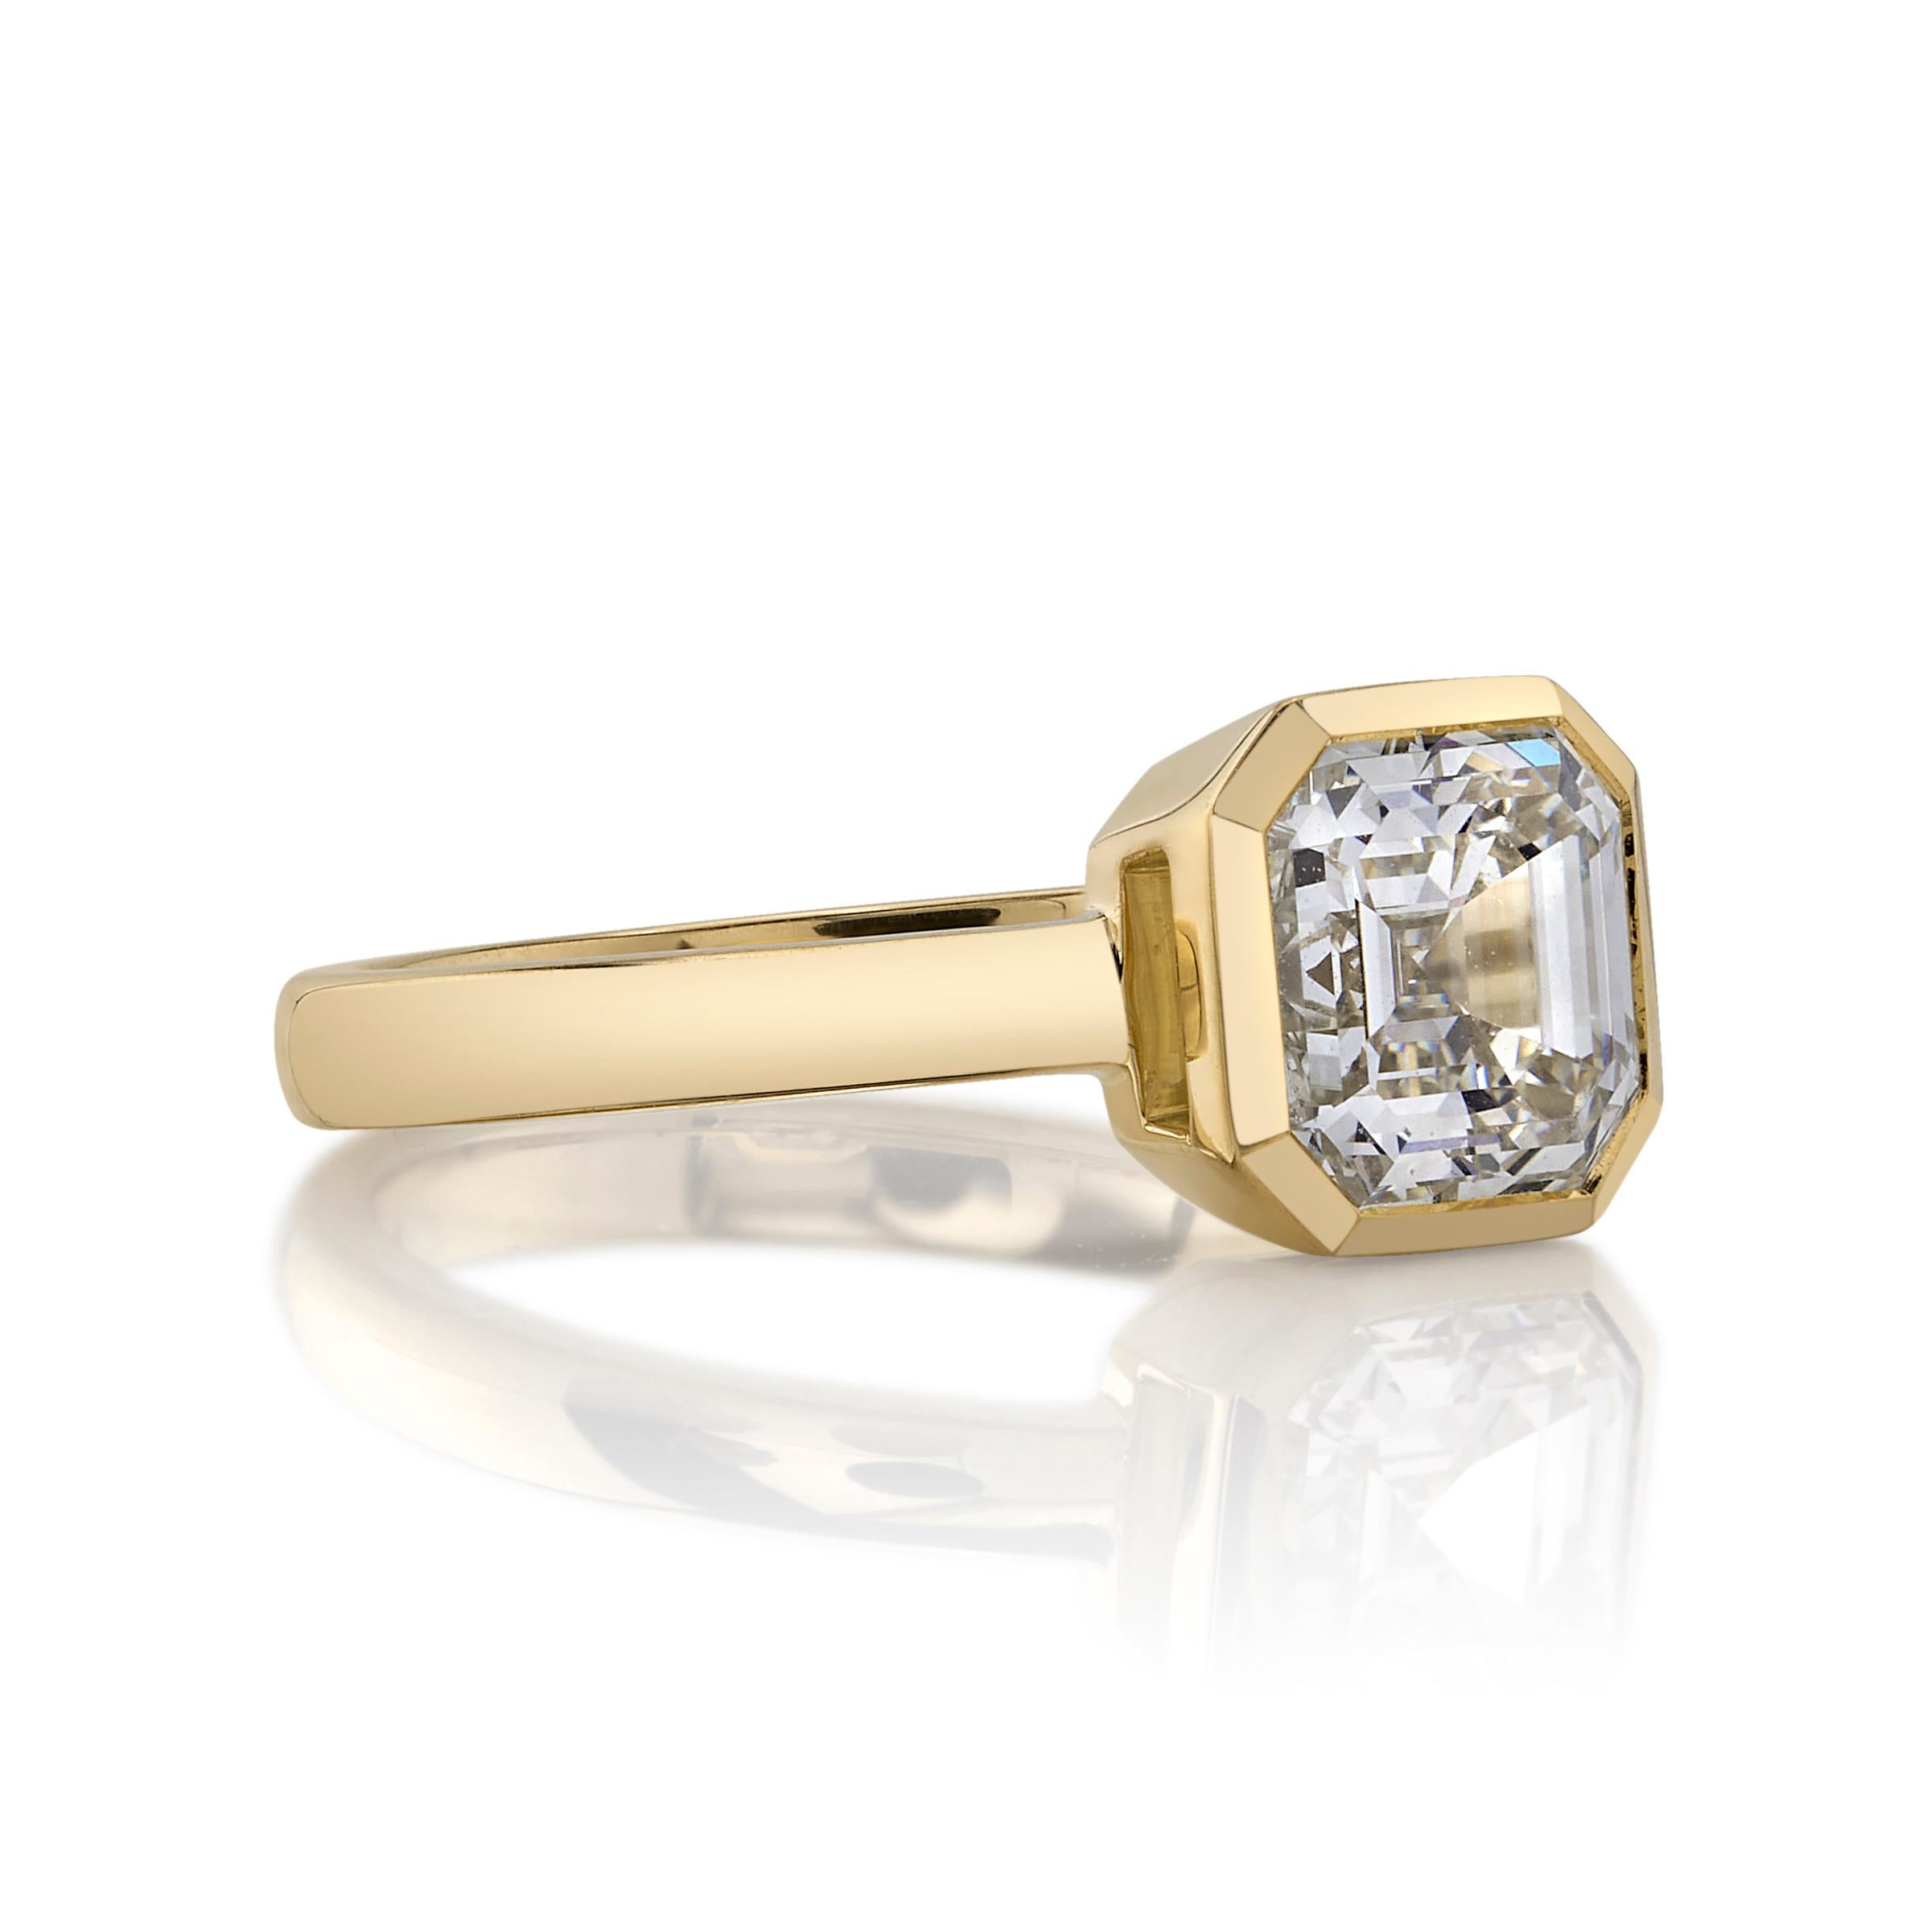 2.04ct L/VVS2 GIA certified Asscher cut diamond set in a handcrafted 18K yellow gold mounting.

Ring is currently a size 6 and can be sized to fit. 

Our jewelry is made locally in Los Angeles and most pieces are made to order. For these